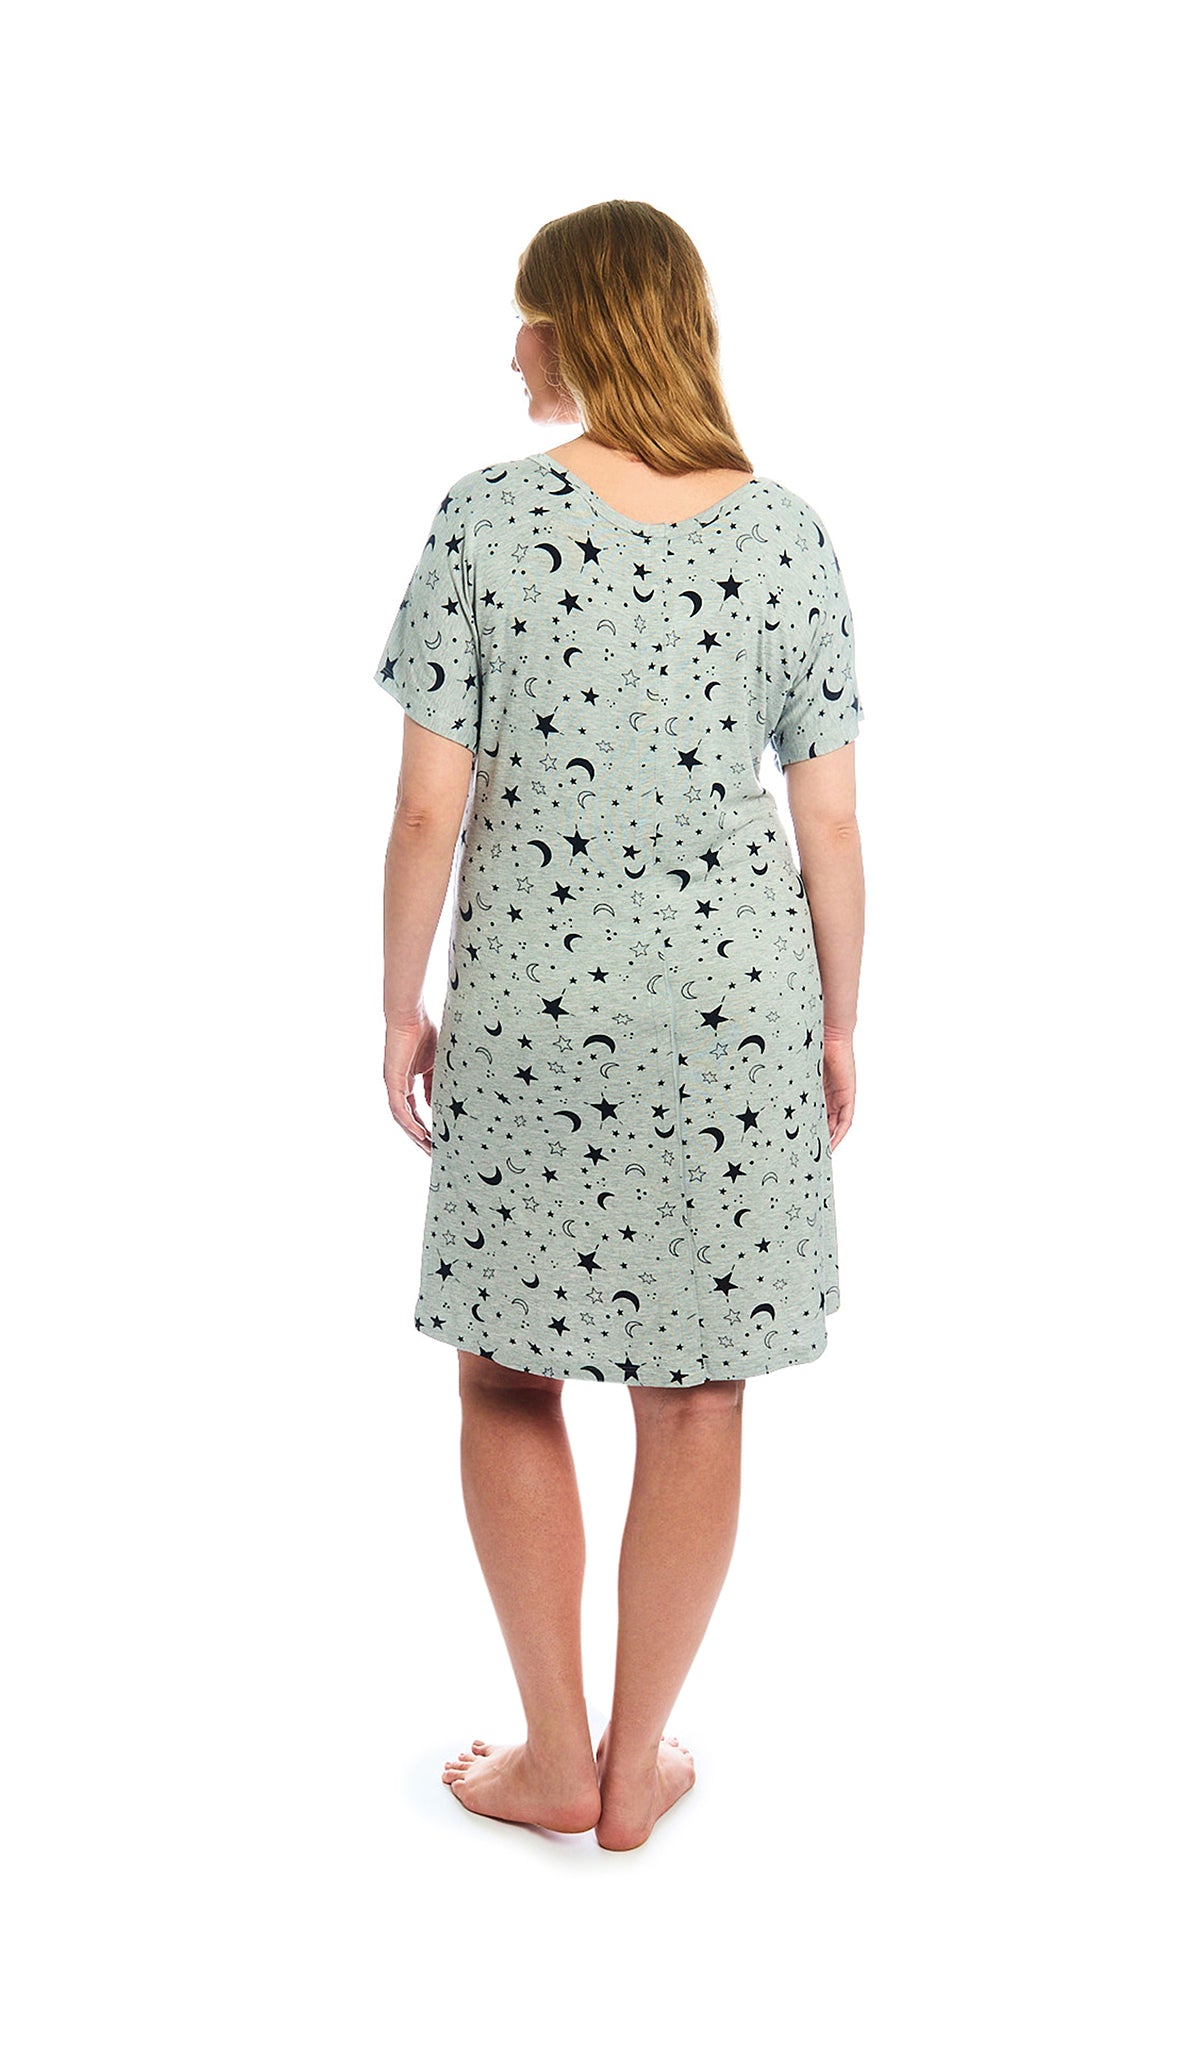 Twinkle Night Rosa hospital gown. Back shot of woman wearing hospital gown with full-length snap-back opening.